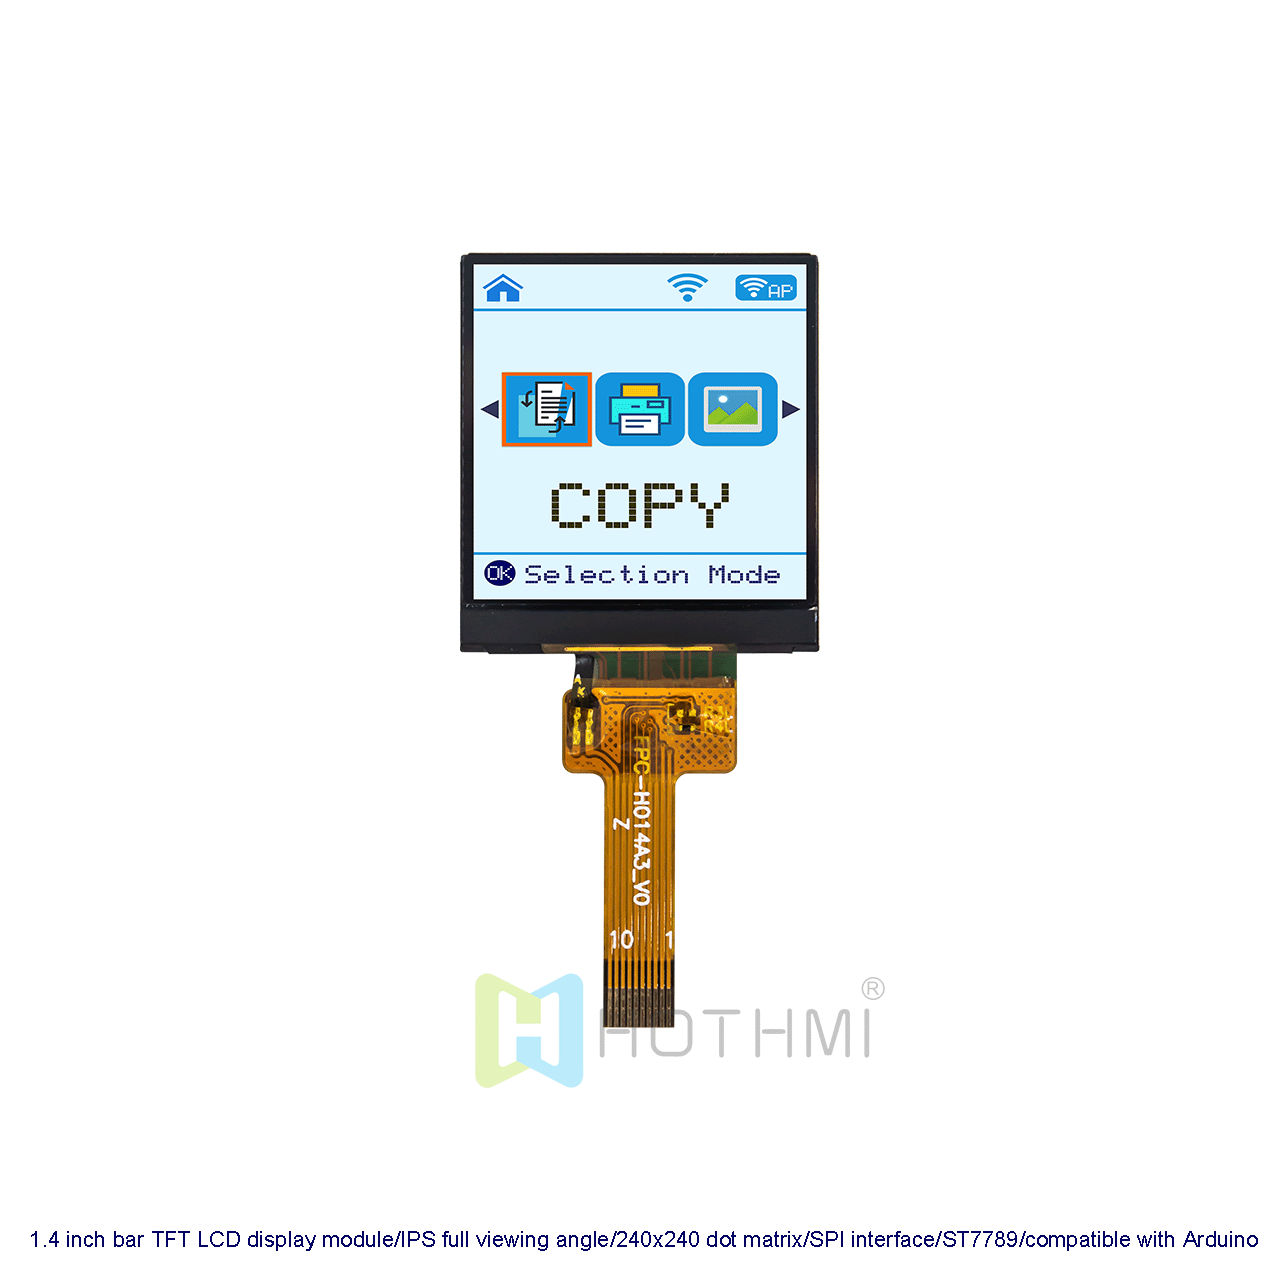 1.4 inch square TFT LCD display module/IPS full viewing angle/240x240 dot matrix/SPI interface/ST7789/compatible with Arduino